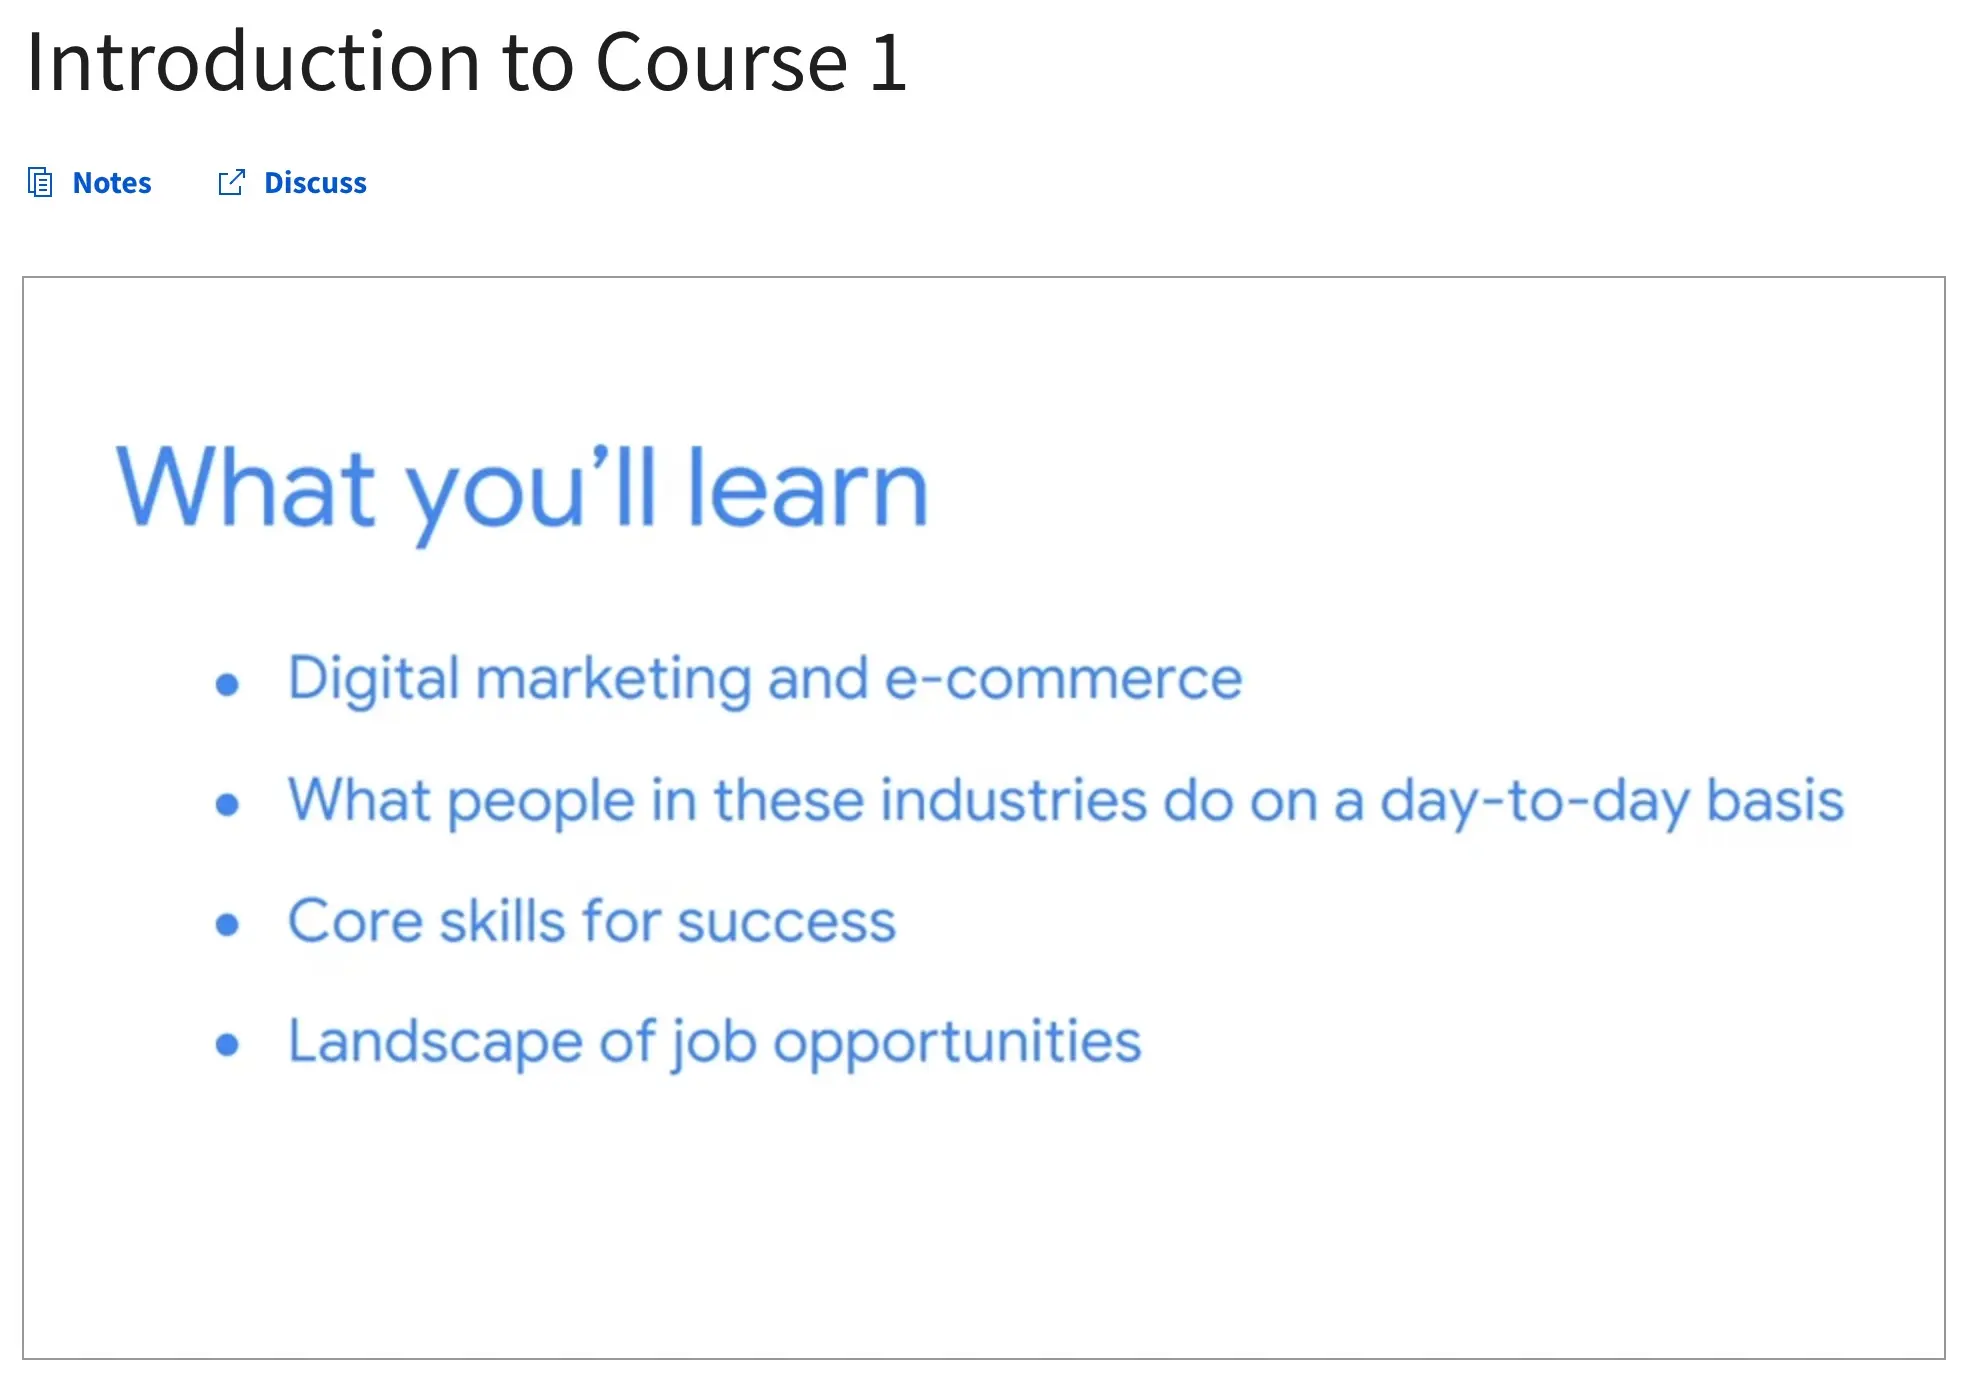 Foundations of Digital Marketing and E-commerce Course